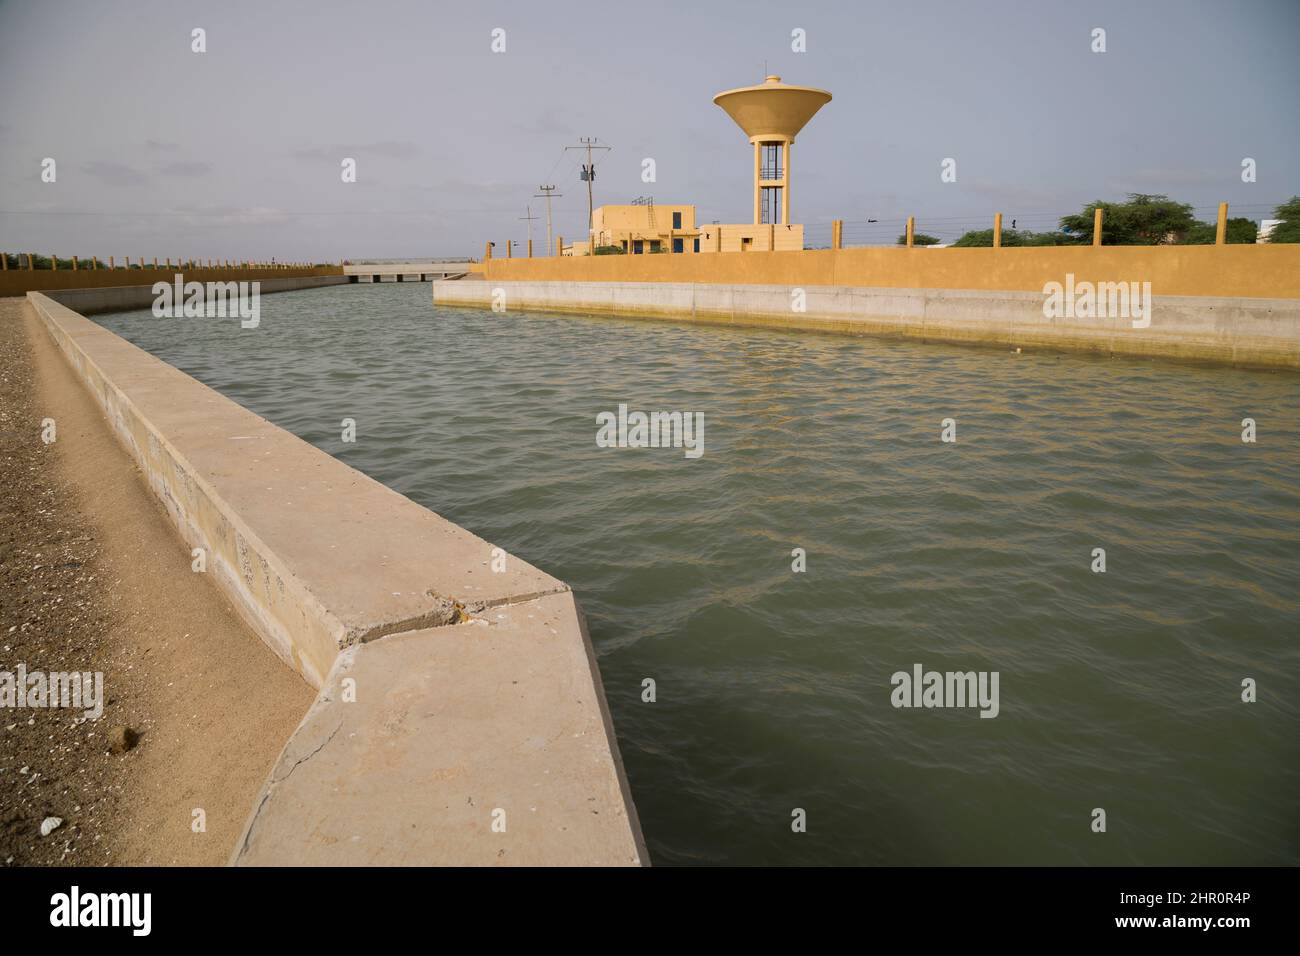 The Diama station is part of new irrigation infrastructure built in the Senegal River Delta by MCC to help farmers irrigate their farmland. Stock Photo